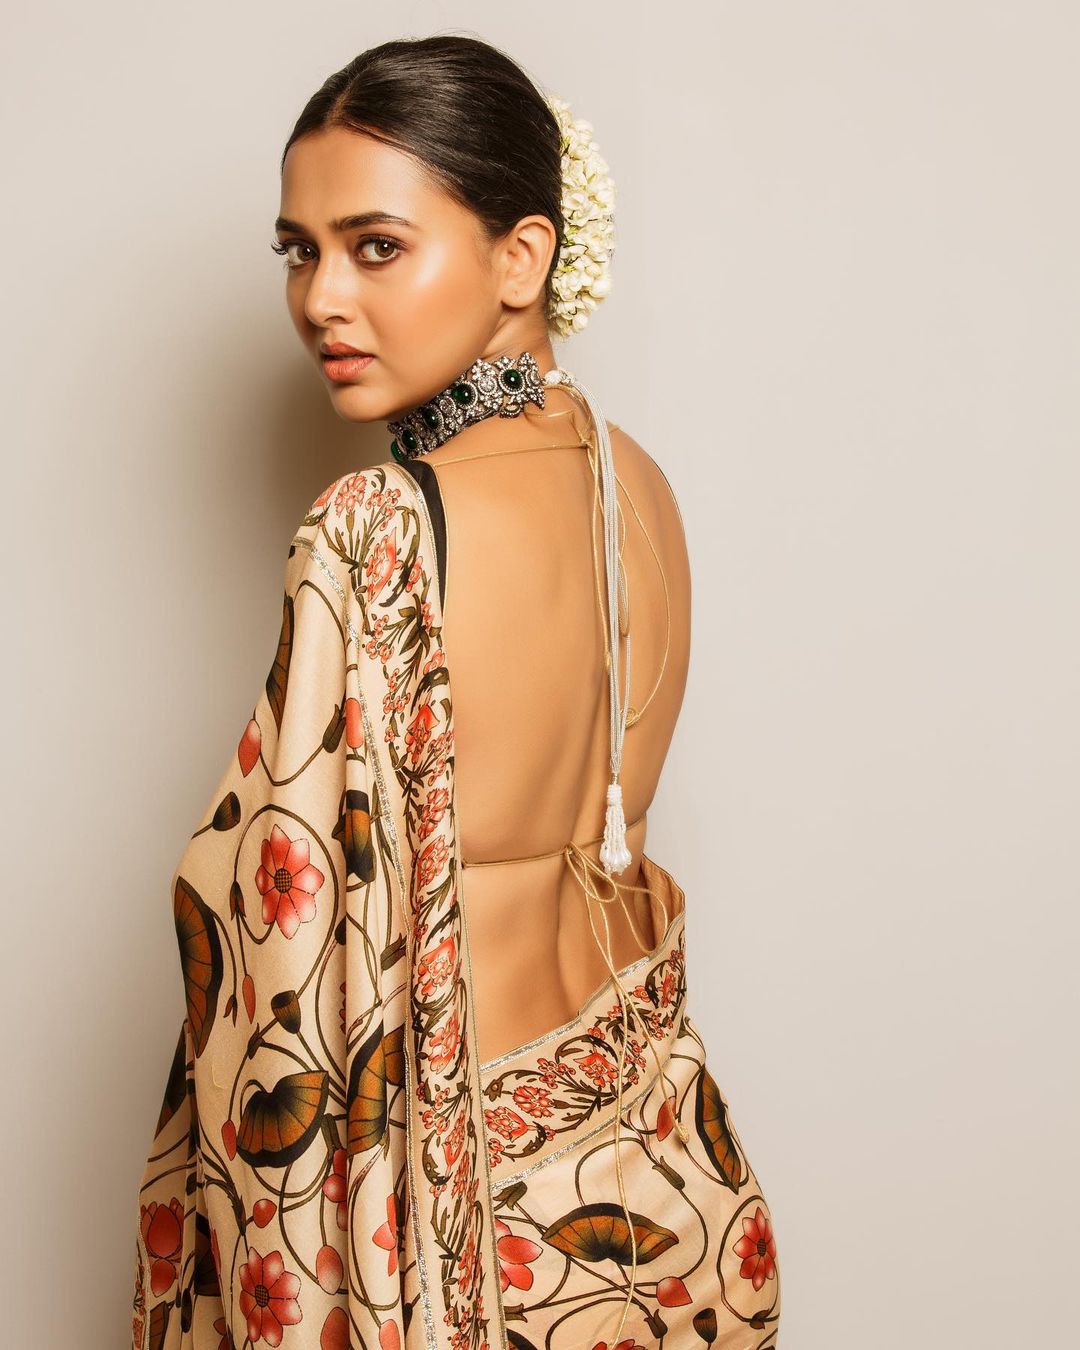 Tejasswi Prakash is looking stellar in a floral saree with backless blouse